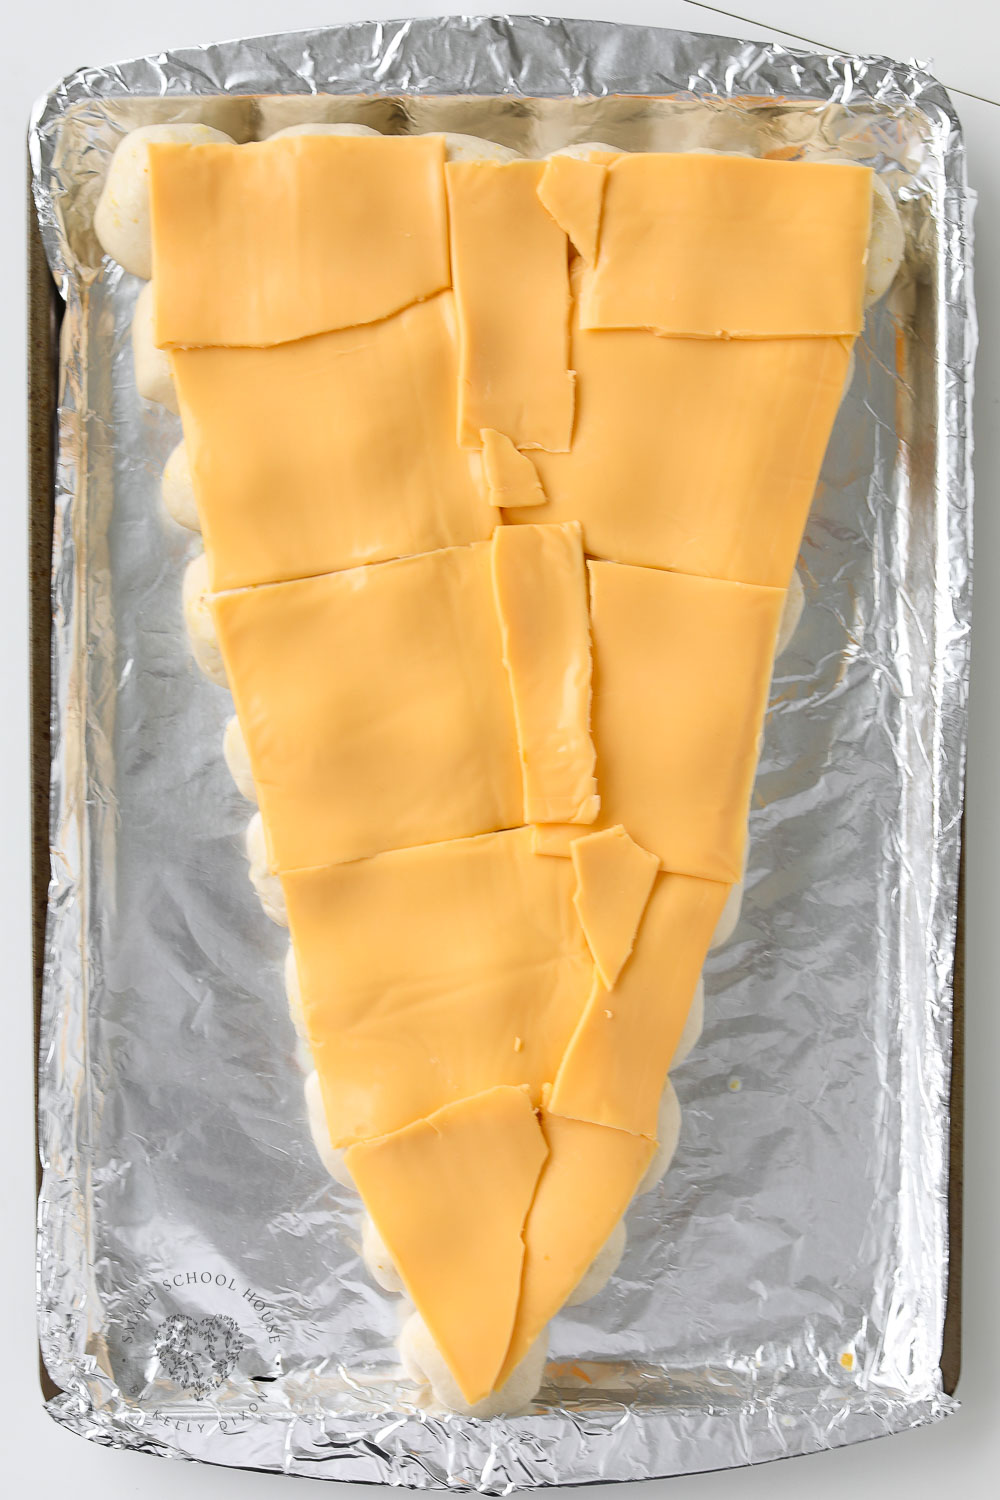 Carrot shaped bread covered in American cheese